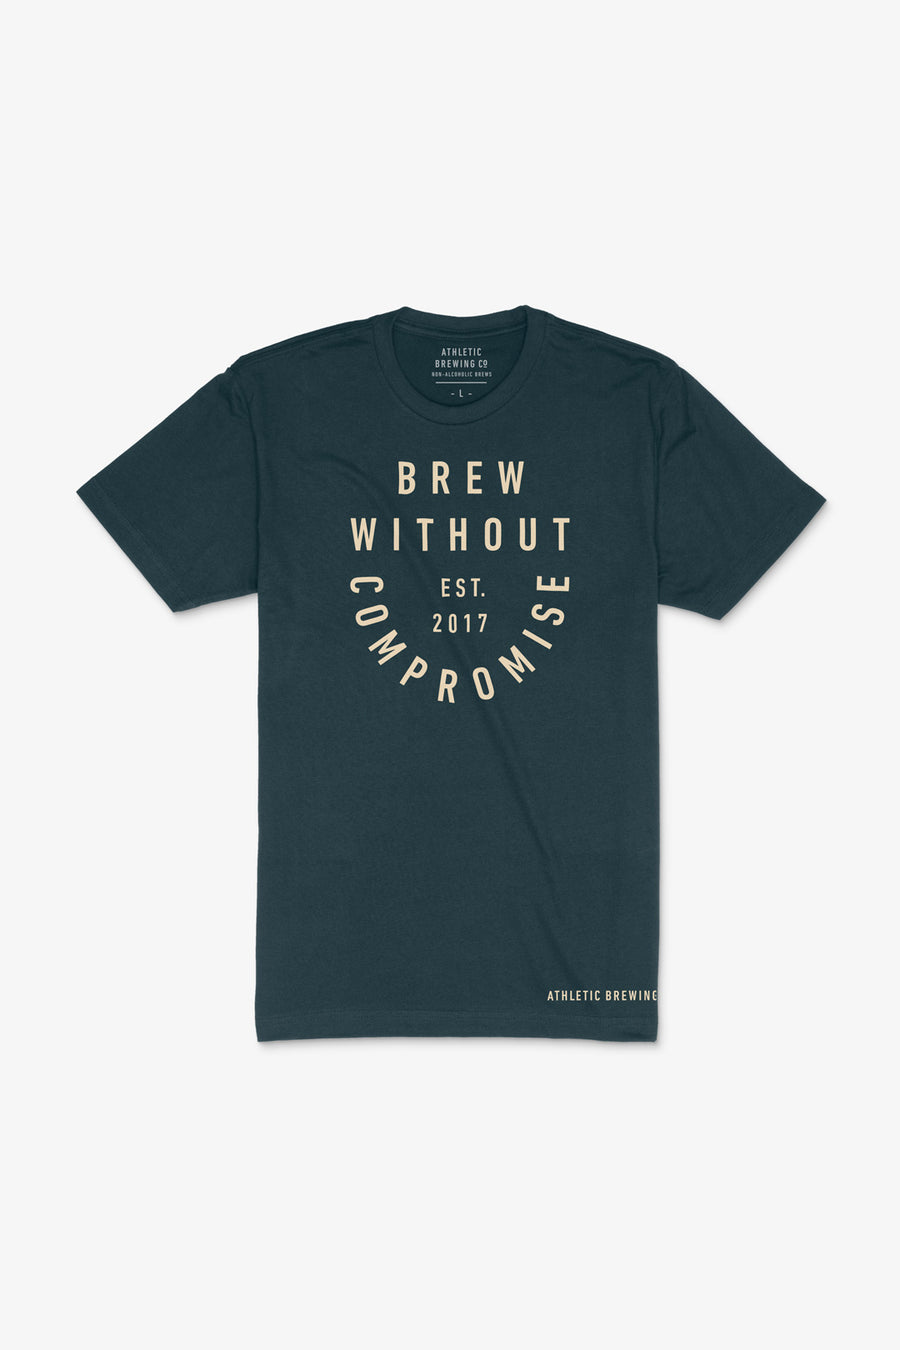 Navy Brew Without Compromise T-Shirt - Unisex